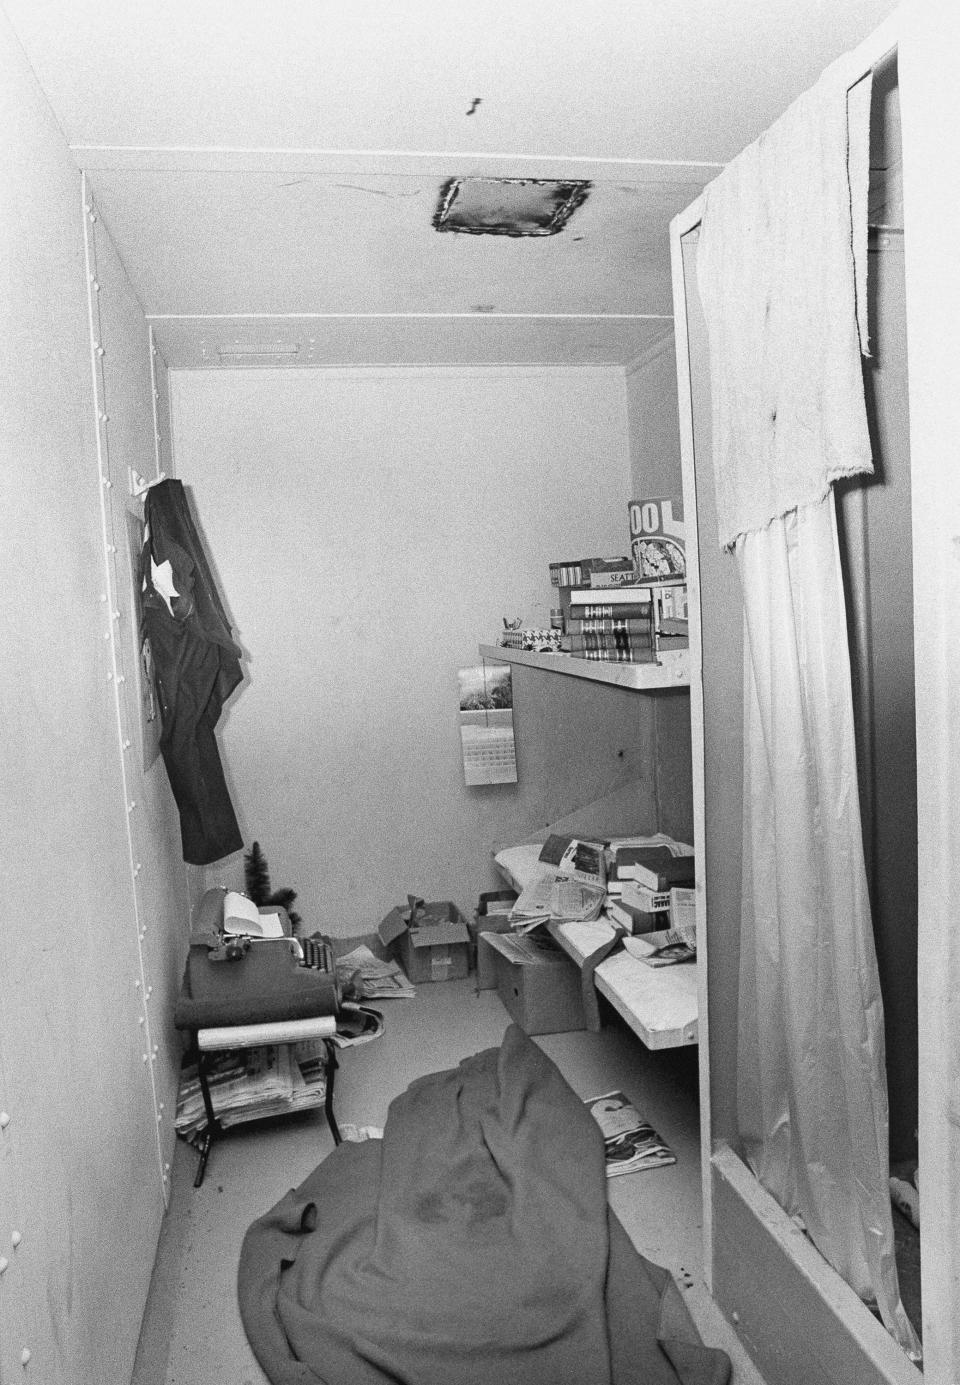 FILE - This 1977 file photo shows the jail cell from which suspected serial killer Ted Bundy escaped on Dec. 30, 1977, in Glenwood Springs, Colo. Bundy piled books under the blankets of his cot to make it appear that he was sleeping, and then cut a hole in the ceiling and climbed to the crawlspace, becoming a fugitive for the second time. (Ross Dolan/Glenwood Springs Post-Independent via AP)